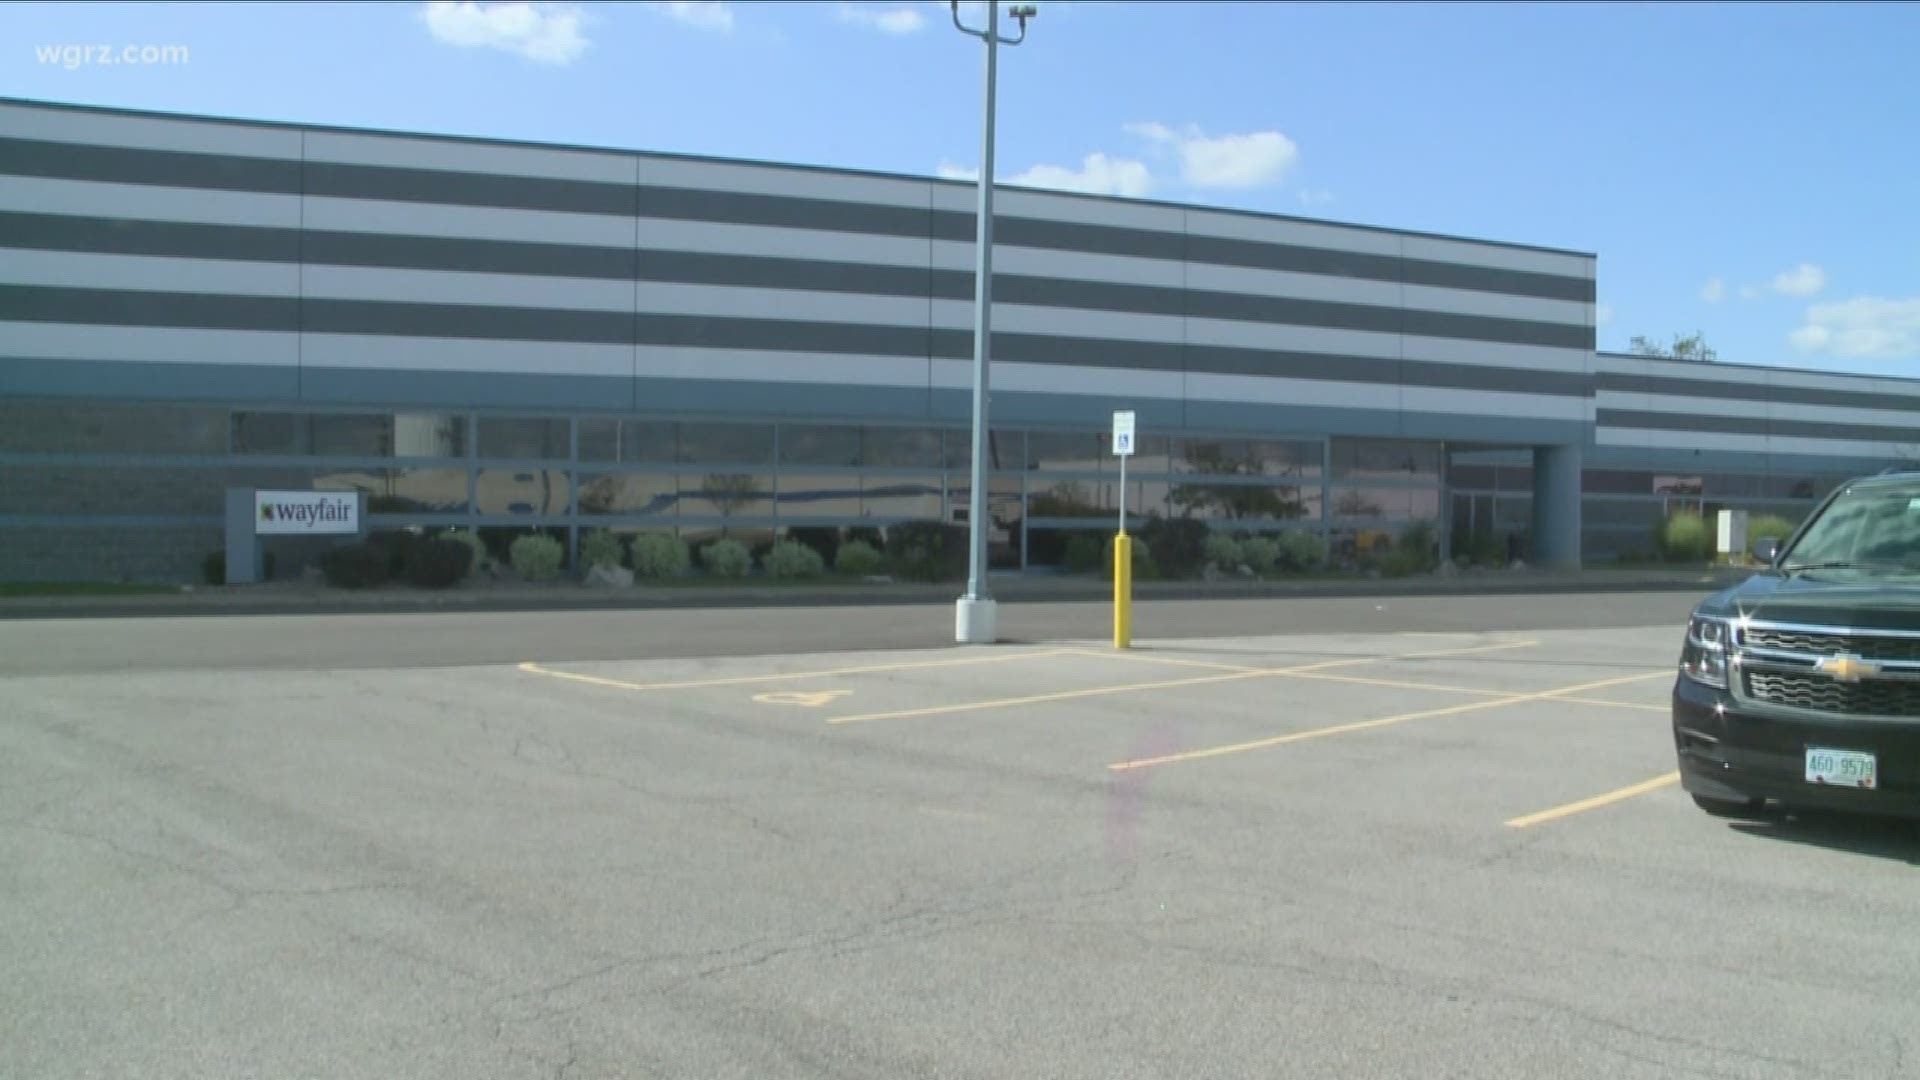 Wayfair have leased space in a 30-thousand square foot warehouse in Benderson Development's Youngmann Development Park in the town of Tonawanda.